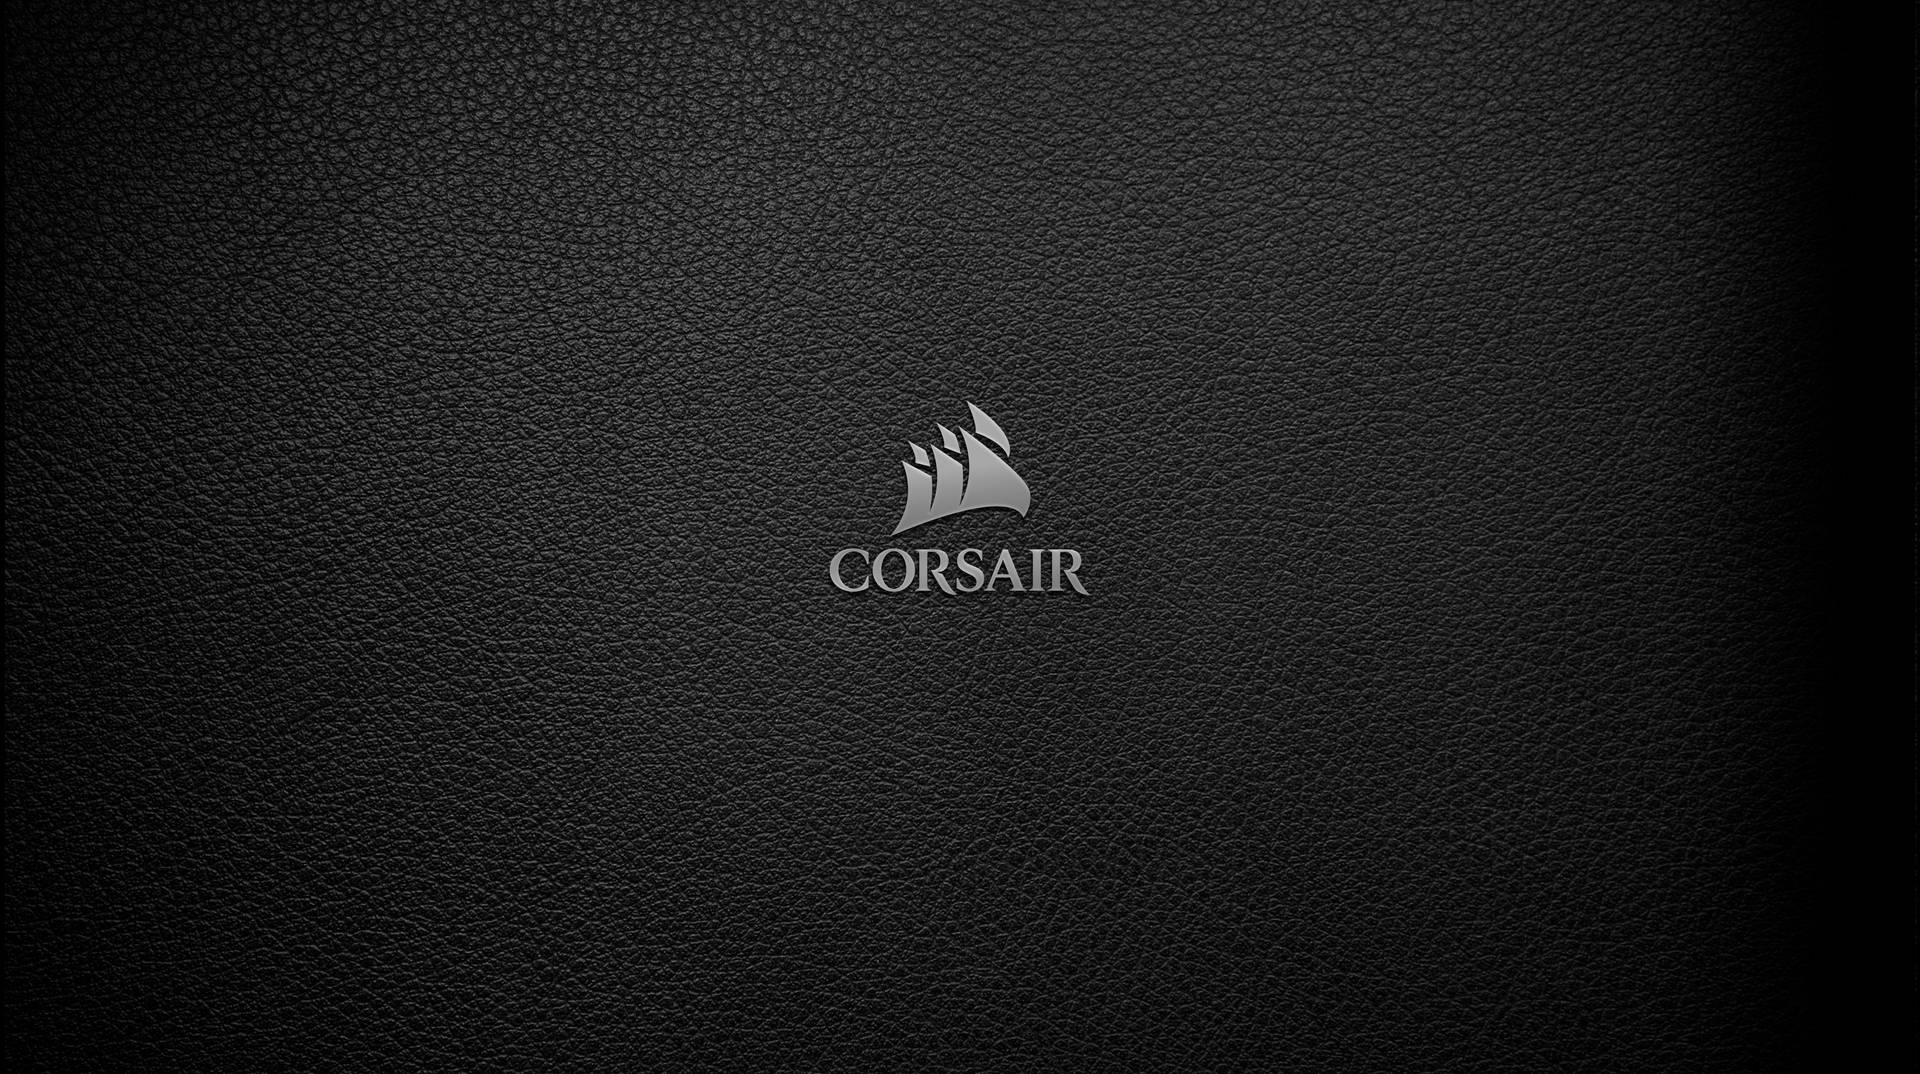 Welcome to the world of Corsair! Wallpaper